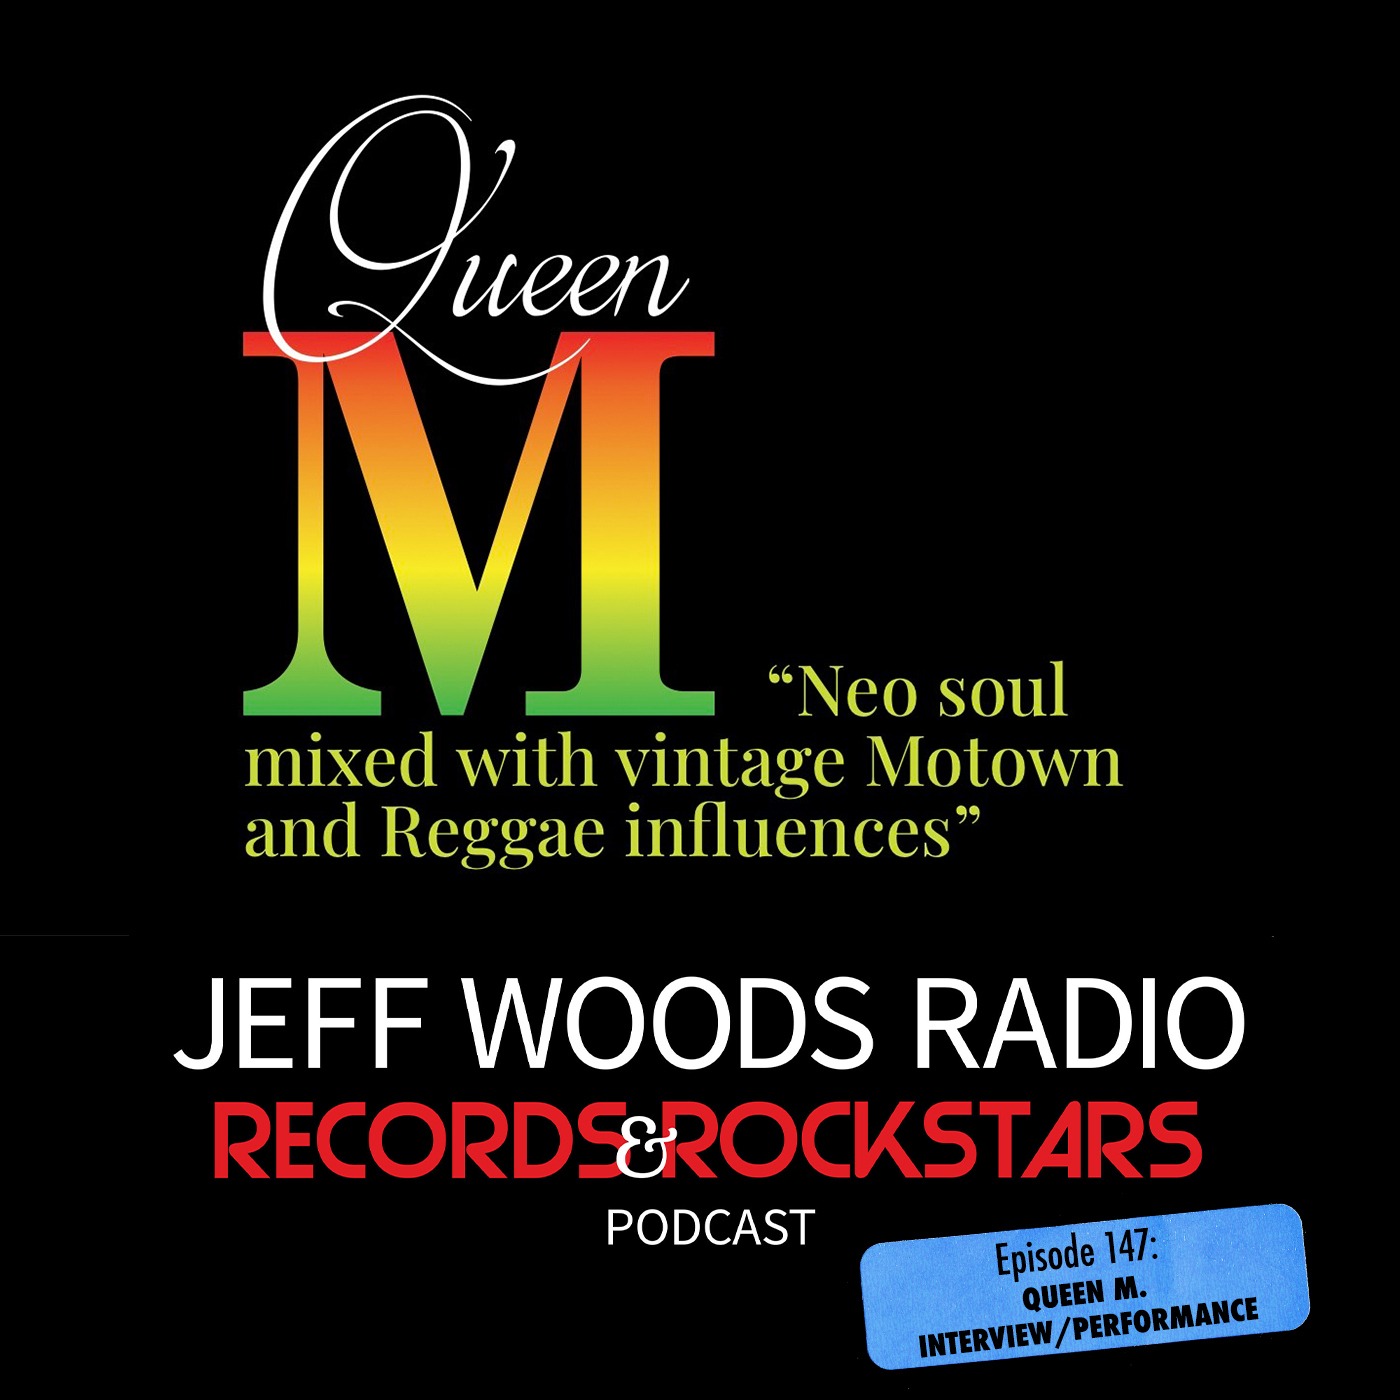 147: Queen M. Interview and Performance